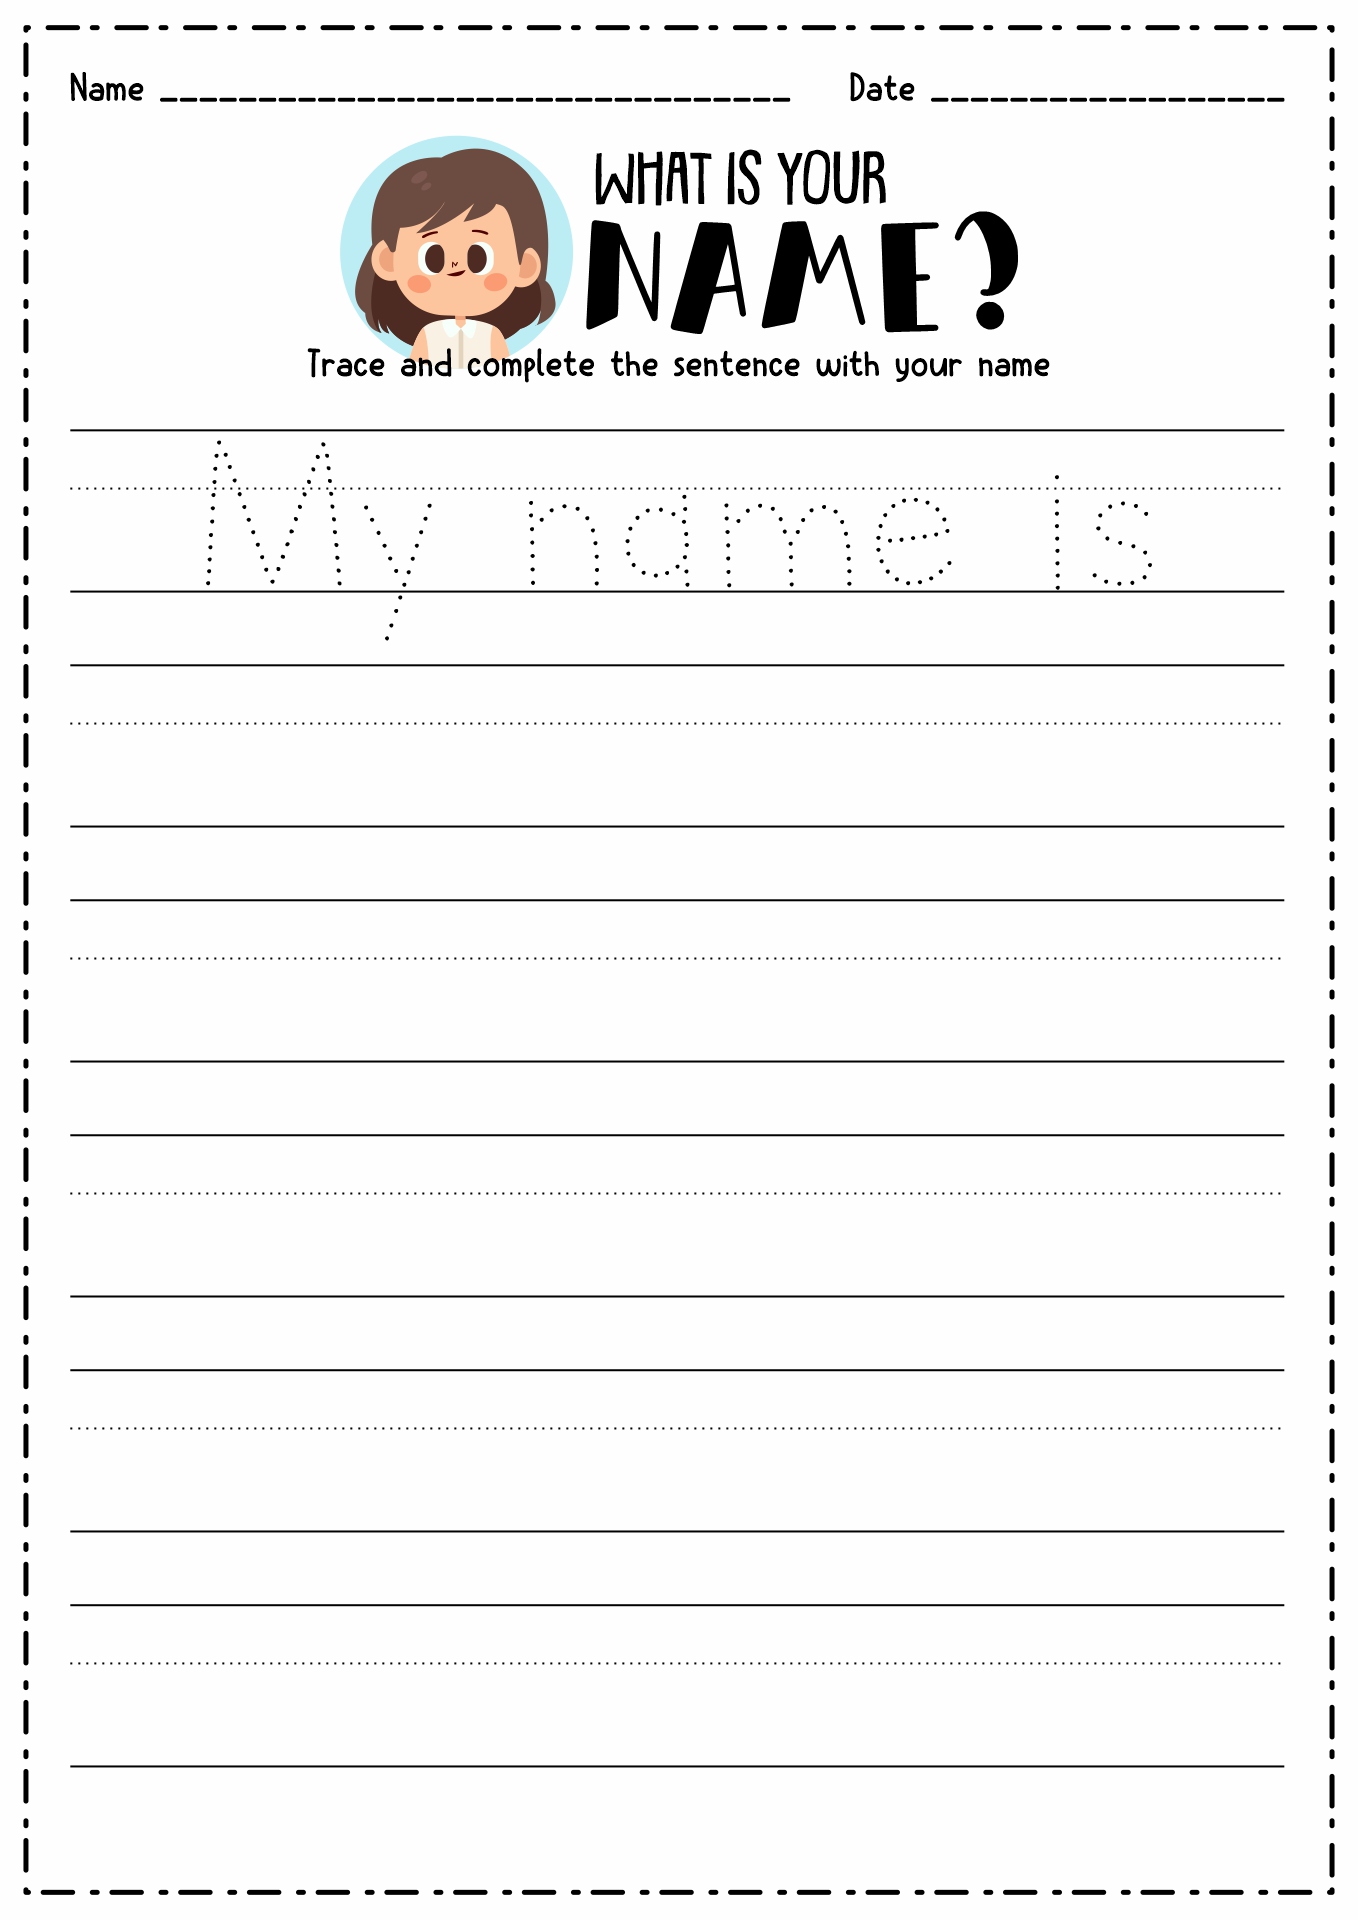 14 Best Images of Create Name Tracing Worksheets  Create Your Own Tracing Name Worksheet, Free 